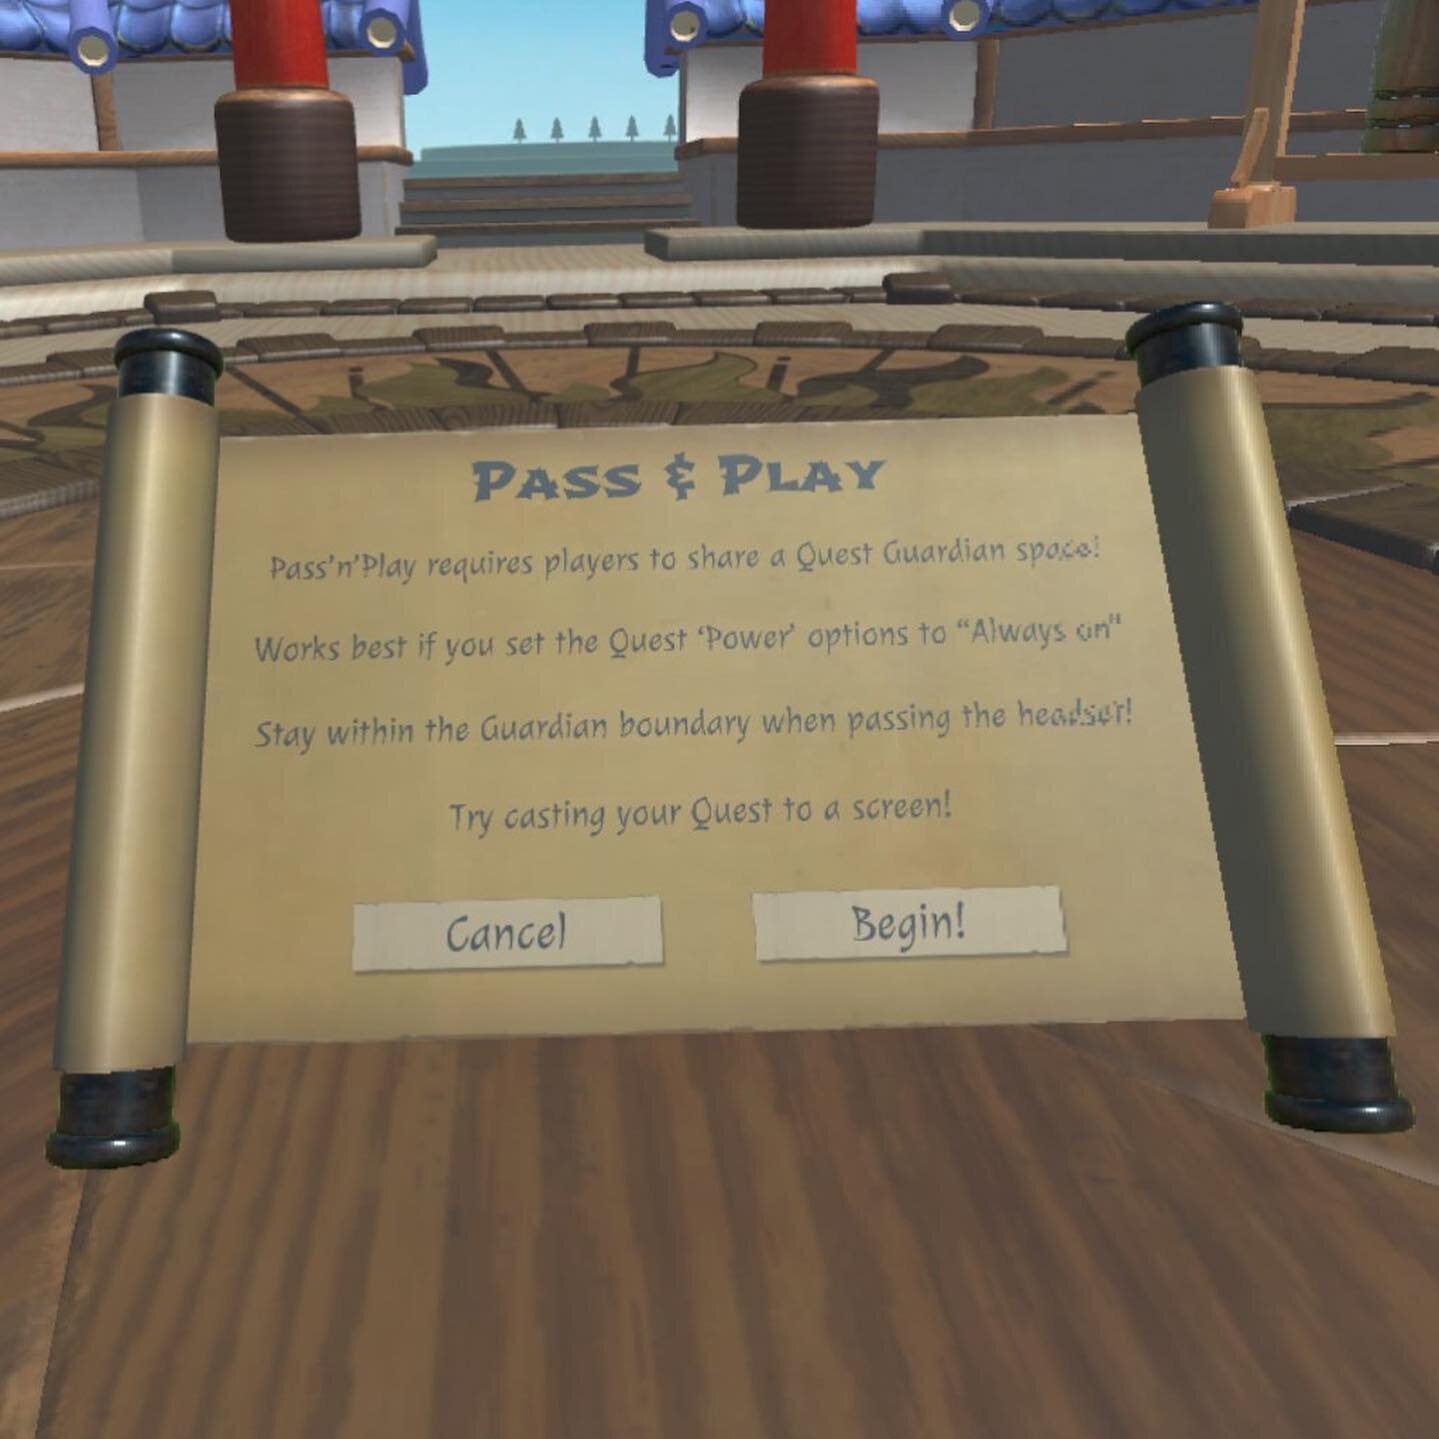 New game modes incoming! Pass-and-play local multiplayer will be added later this month! #VR #Quest2 #MetaQuest #OculusQuest